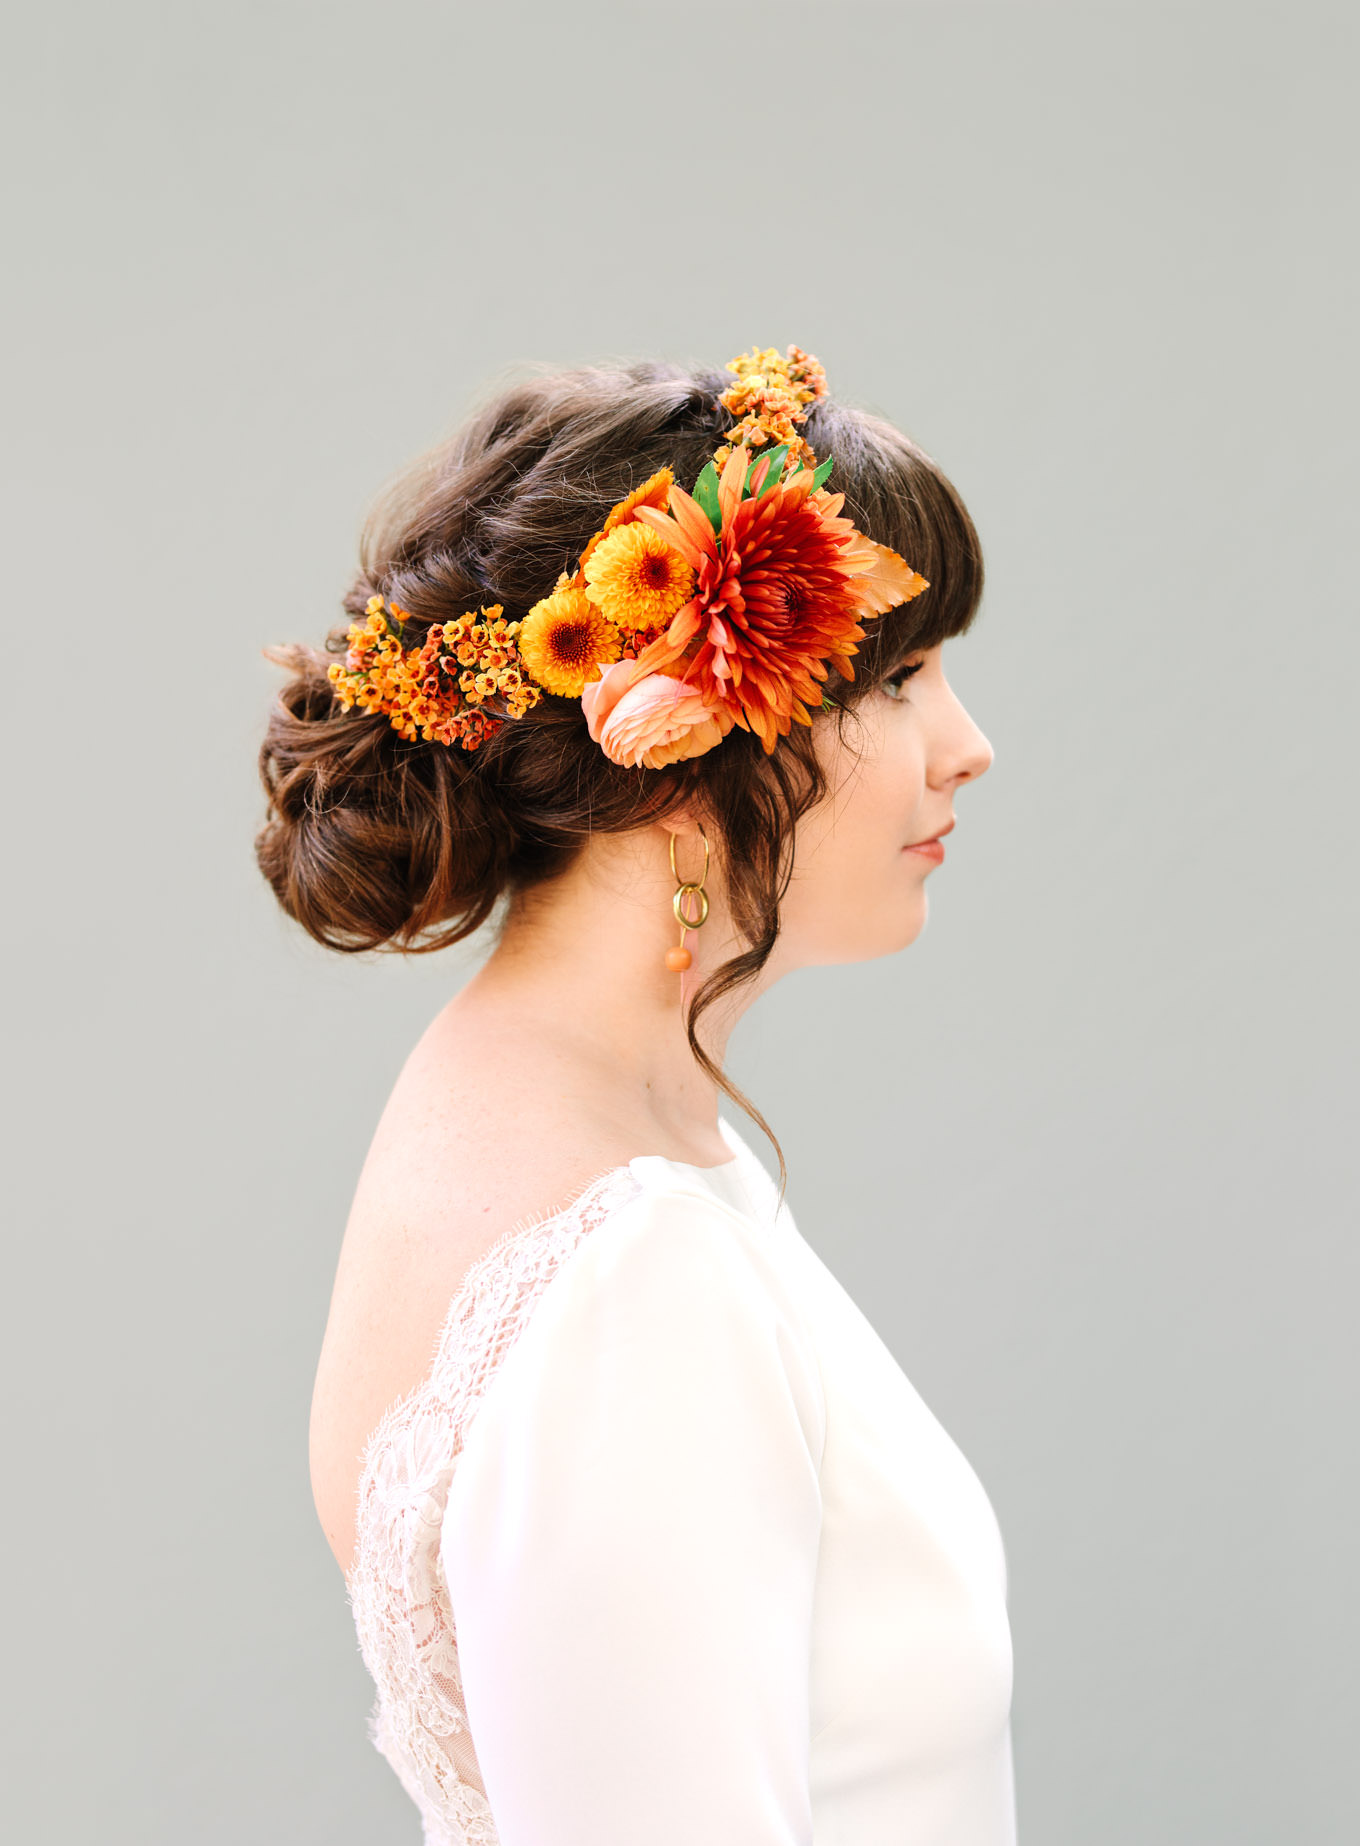 Gorgeous bridal profile with floral crown | Vibrant backyard micro wedding featured on Green Wedding Shoes | Colorful LA wedding photography | #losangeleswedding #backyardwedding #microwedding #laweddingphotographer Source: Mary Costa Photography | Los Angeles